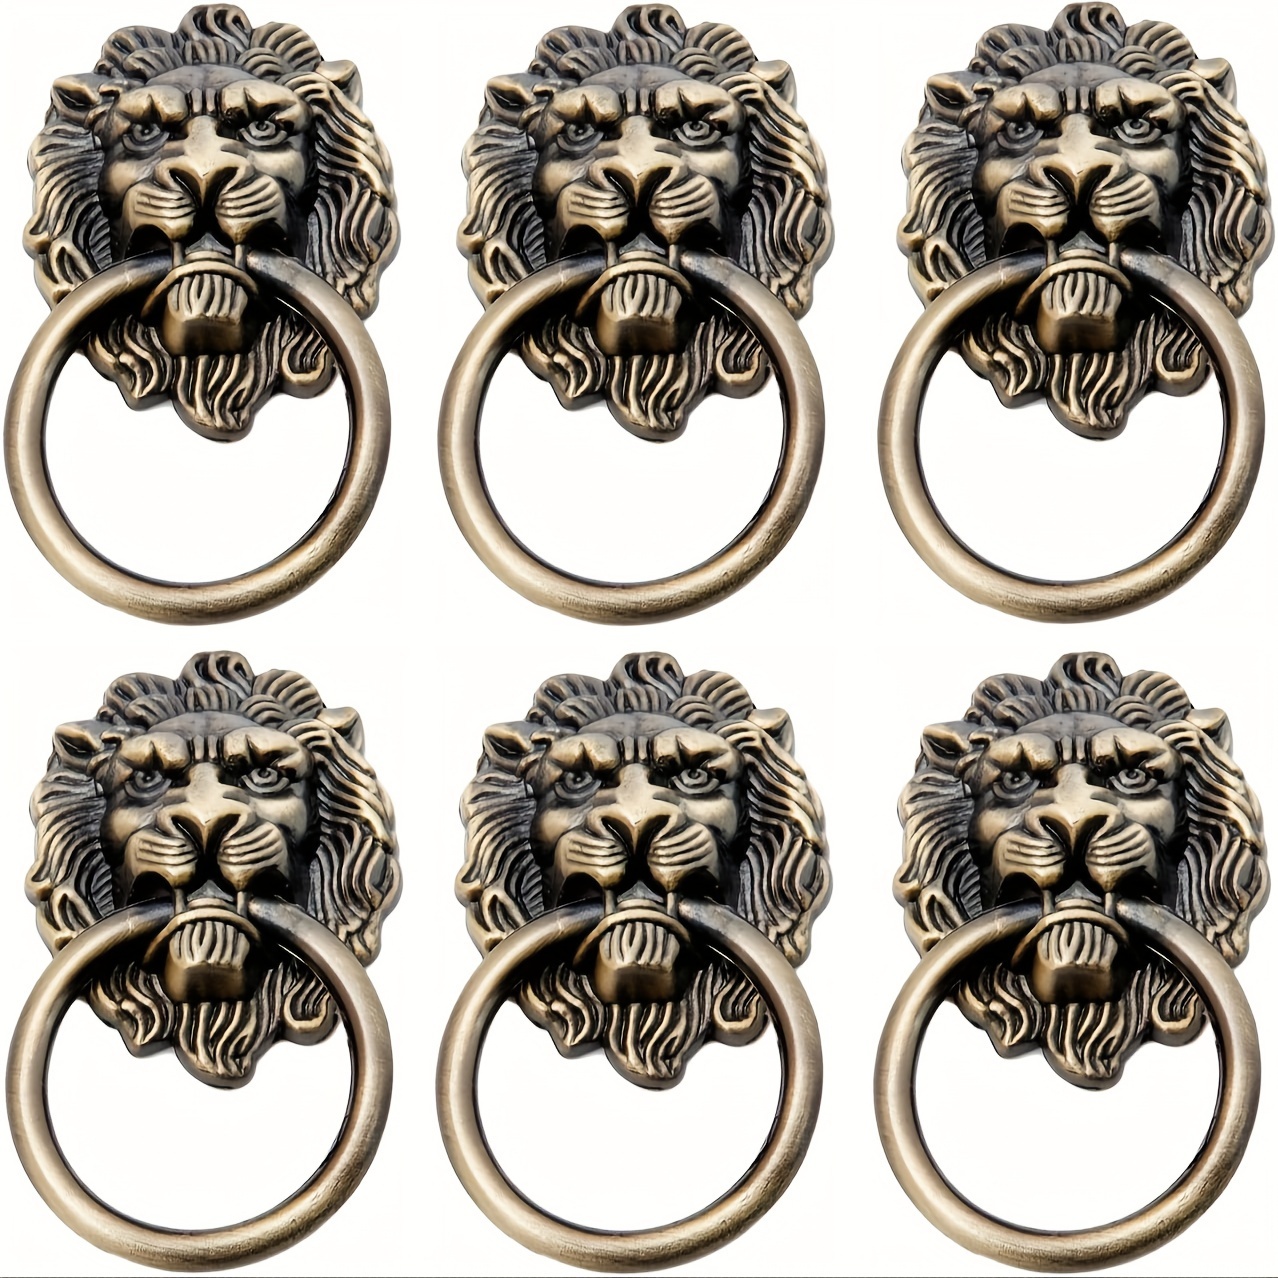 

6 Pack Antique Lion Head Ring Pull Handles With Installation Hardware, Metal Zinc Alloy Drawer Cabinet Knobs For Dresser, Wardrobe, Jewelry Box - Vintage Style Bronze Finish Drawer Pulls